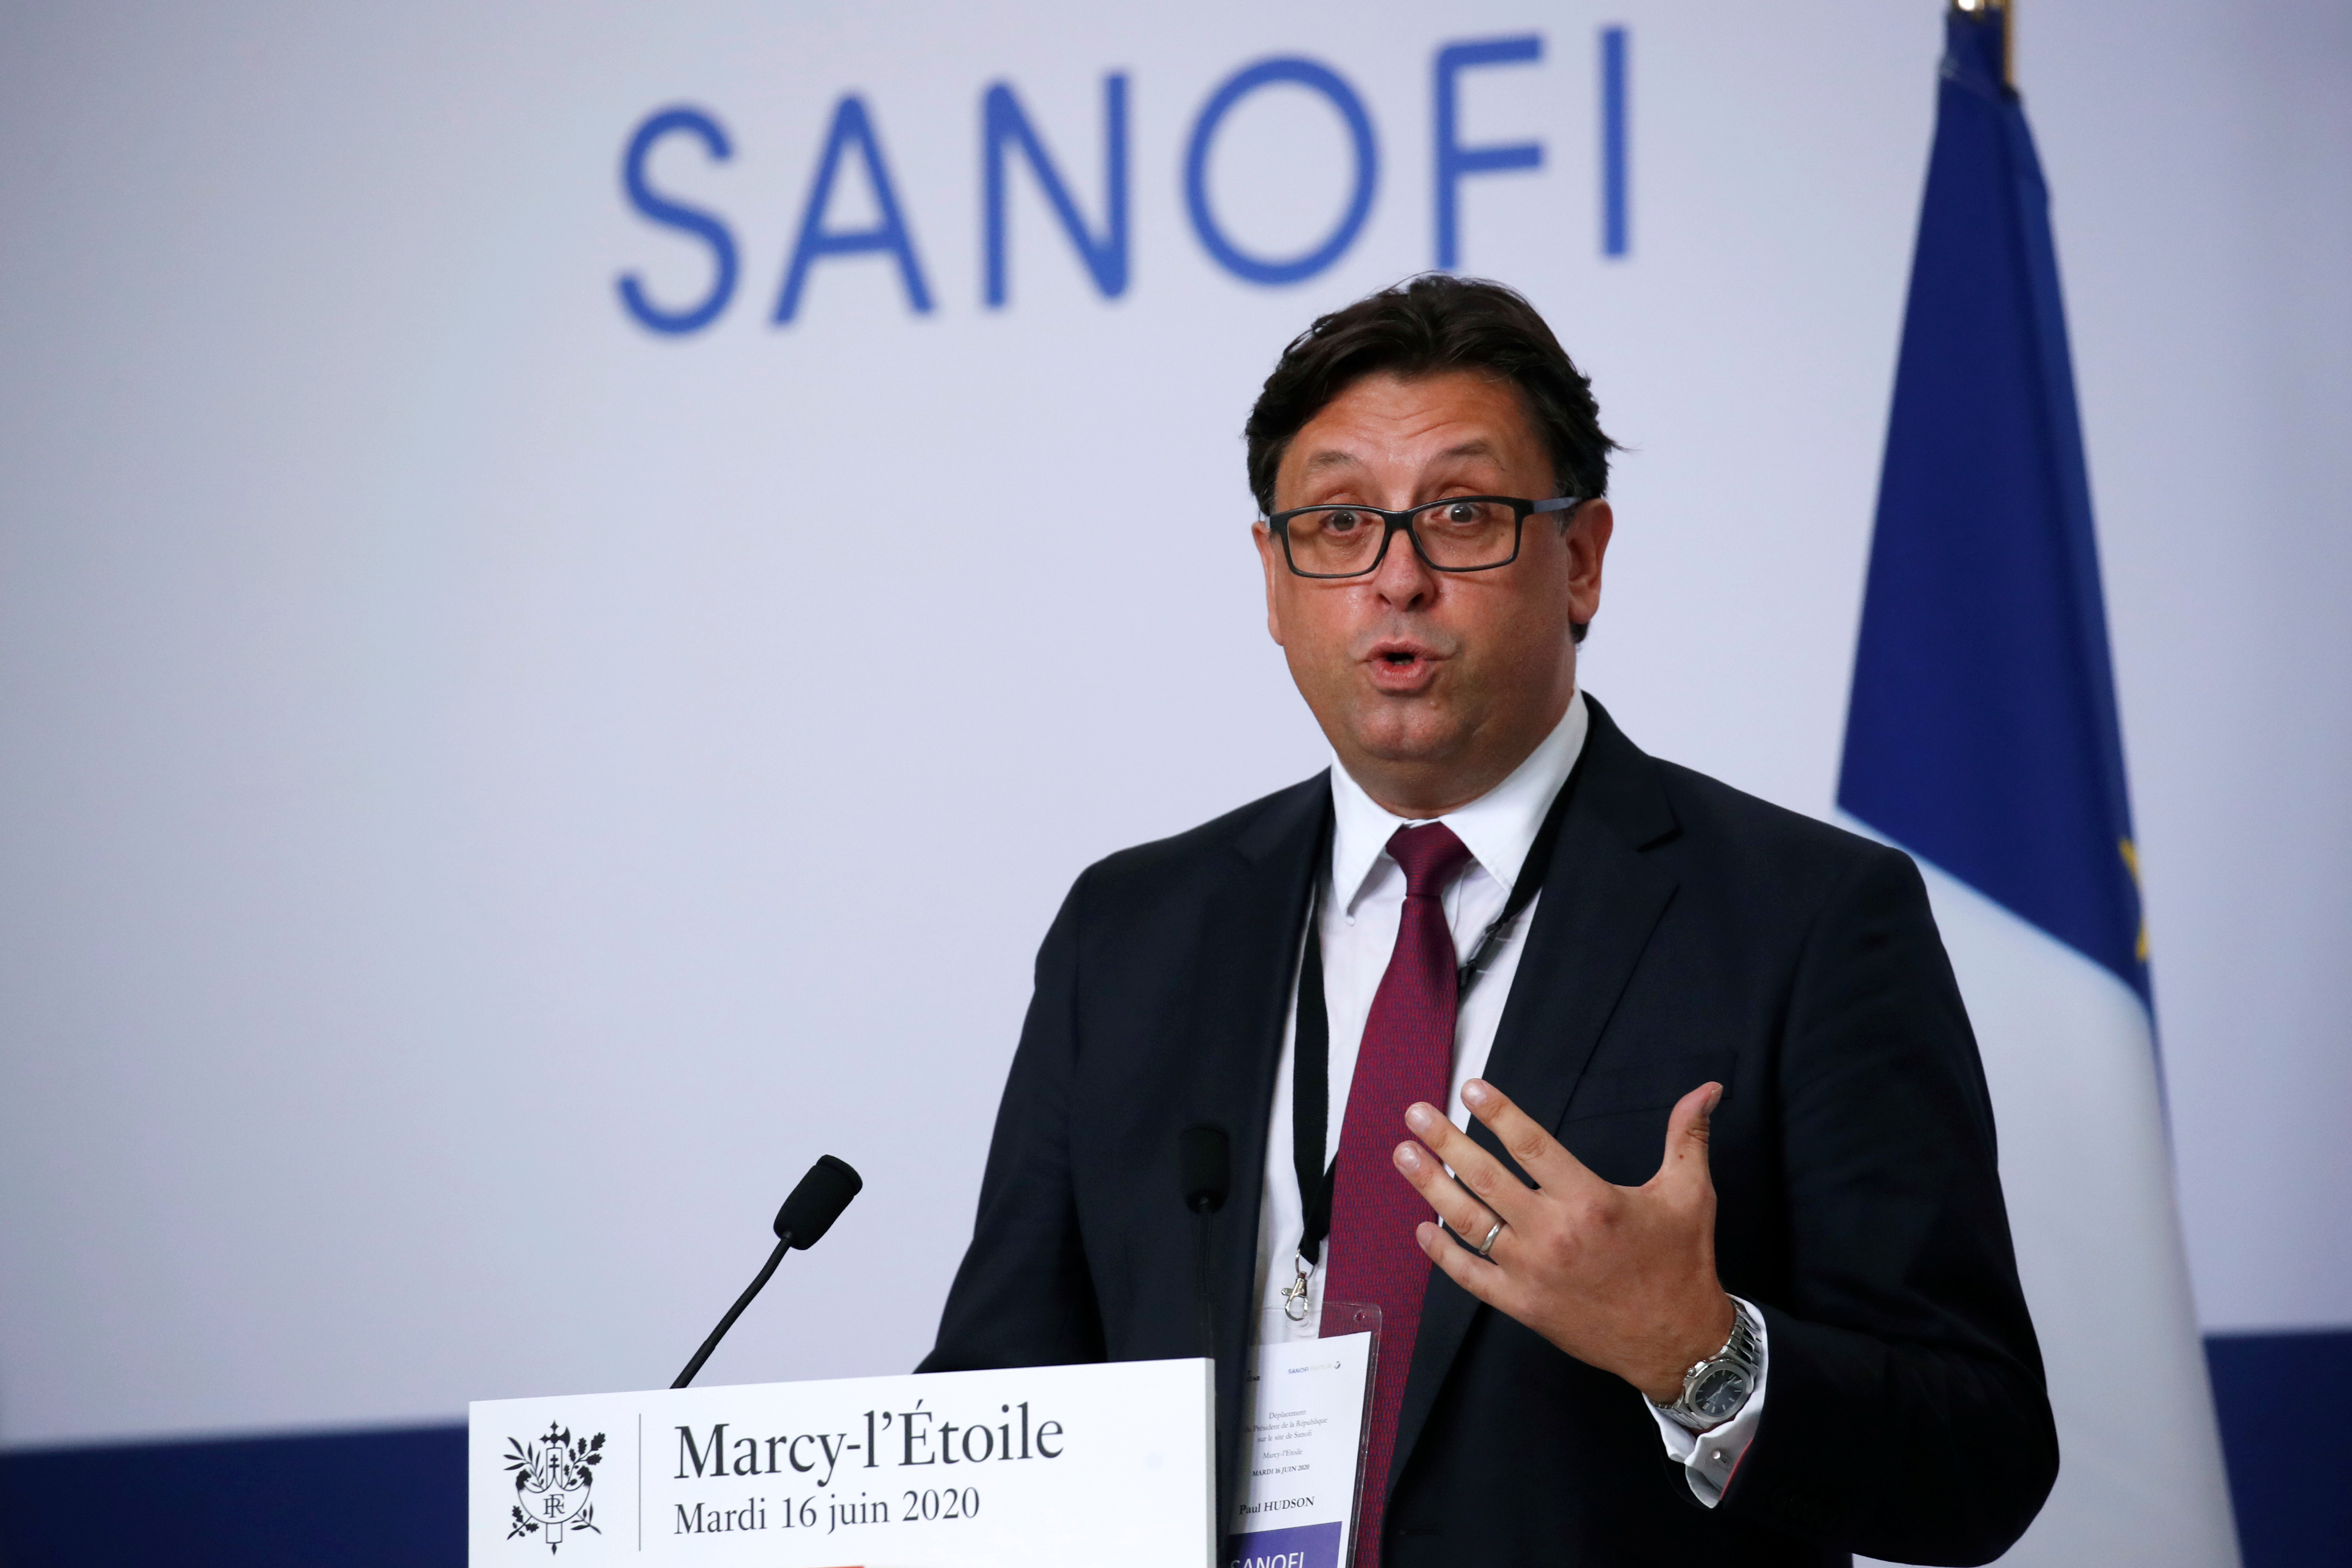 Paul Hudson, Chief Executive Officer of Sanofi, delivers a speech after a visit at the French drugmaker's vaccine unit Sanofi Pasteur plant in Marcy-l'Etoile, near Lyon, France, June 16, 2020. REUTERS/Gonzalo Fuentes/Pool